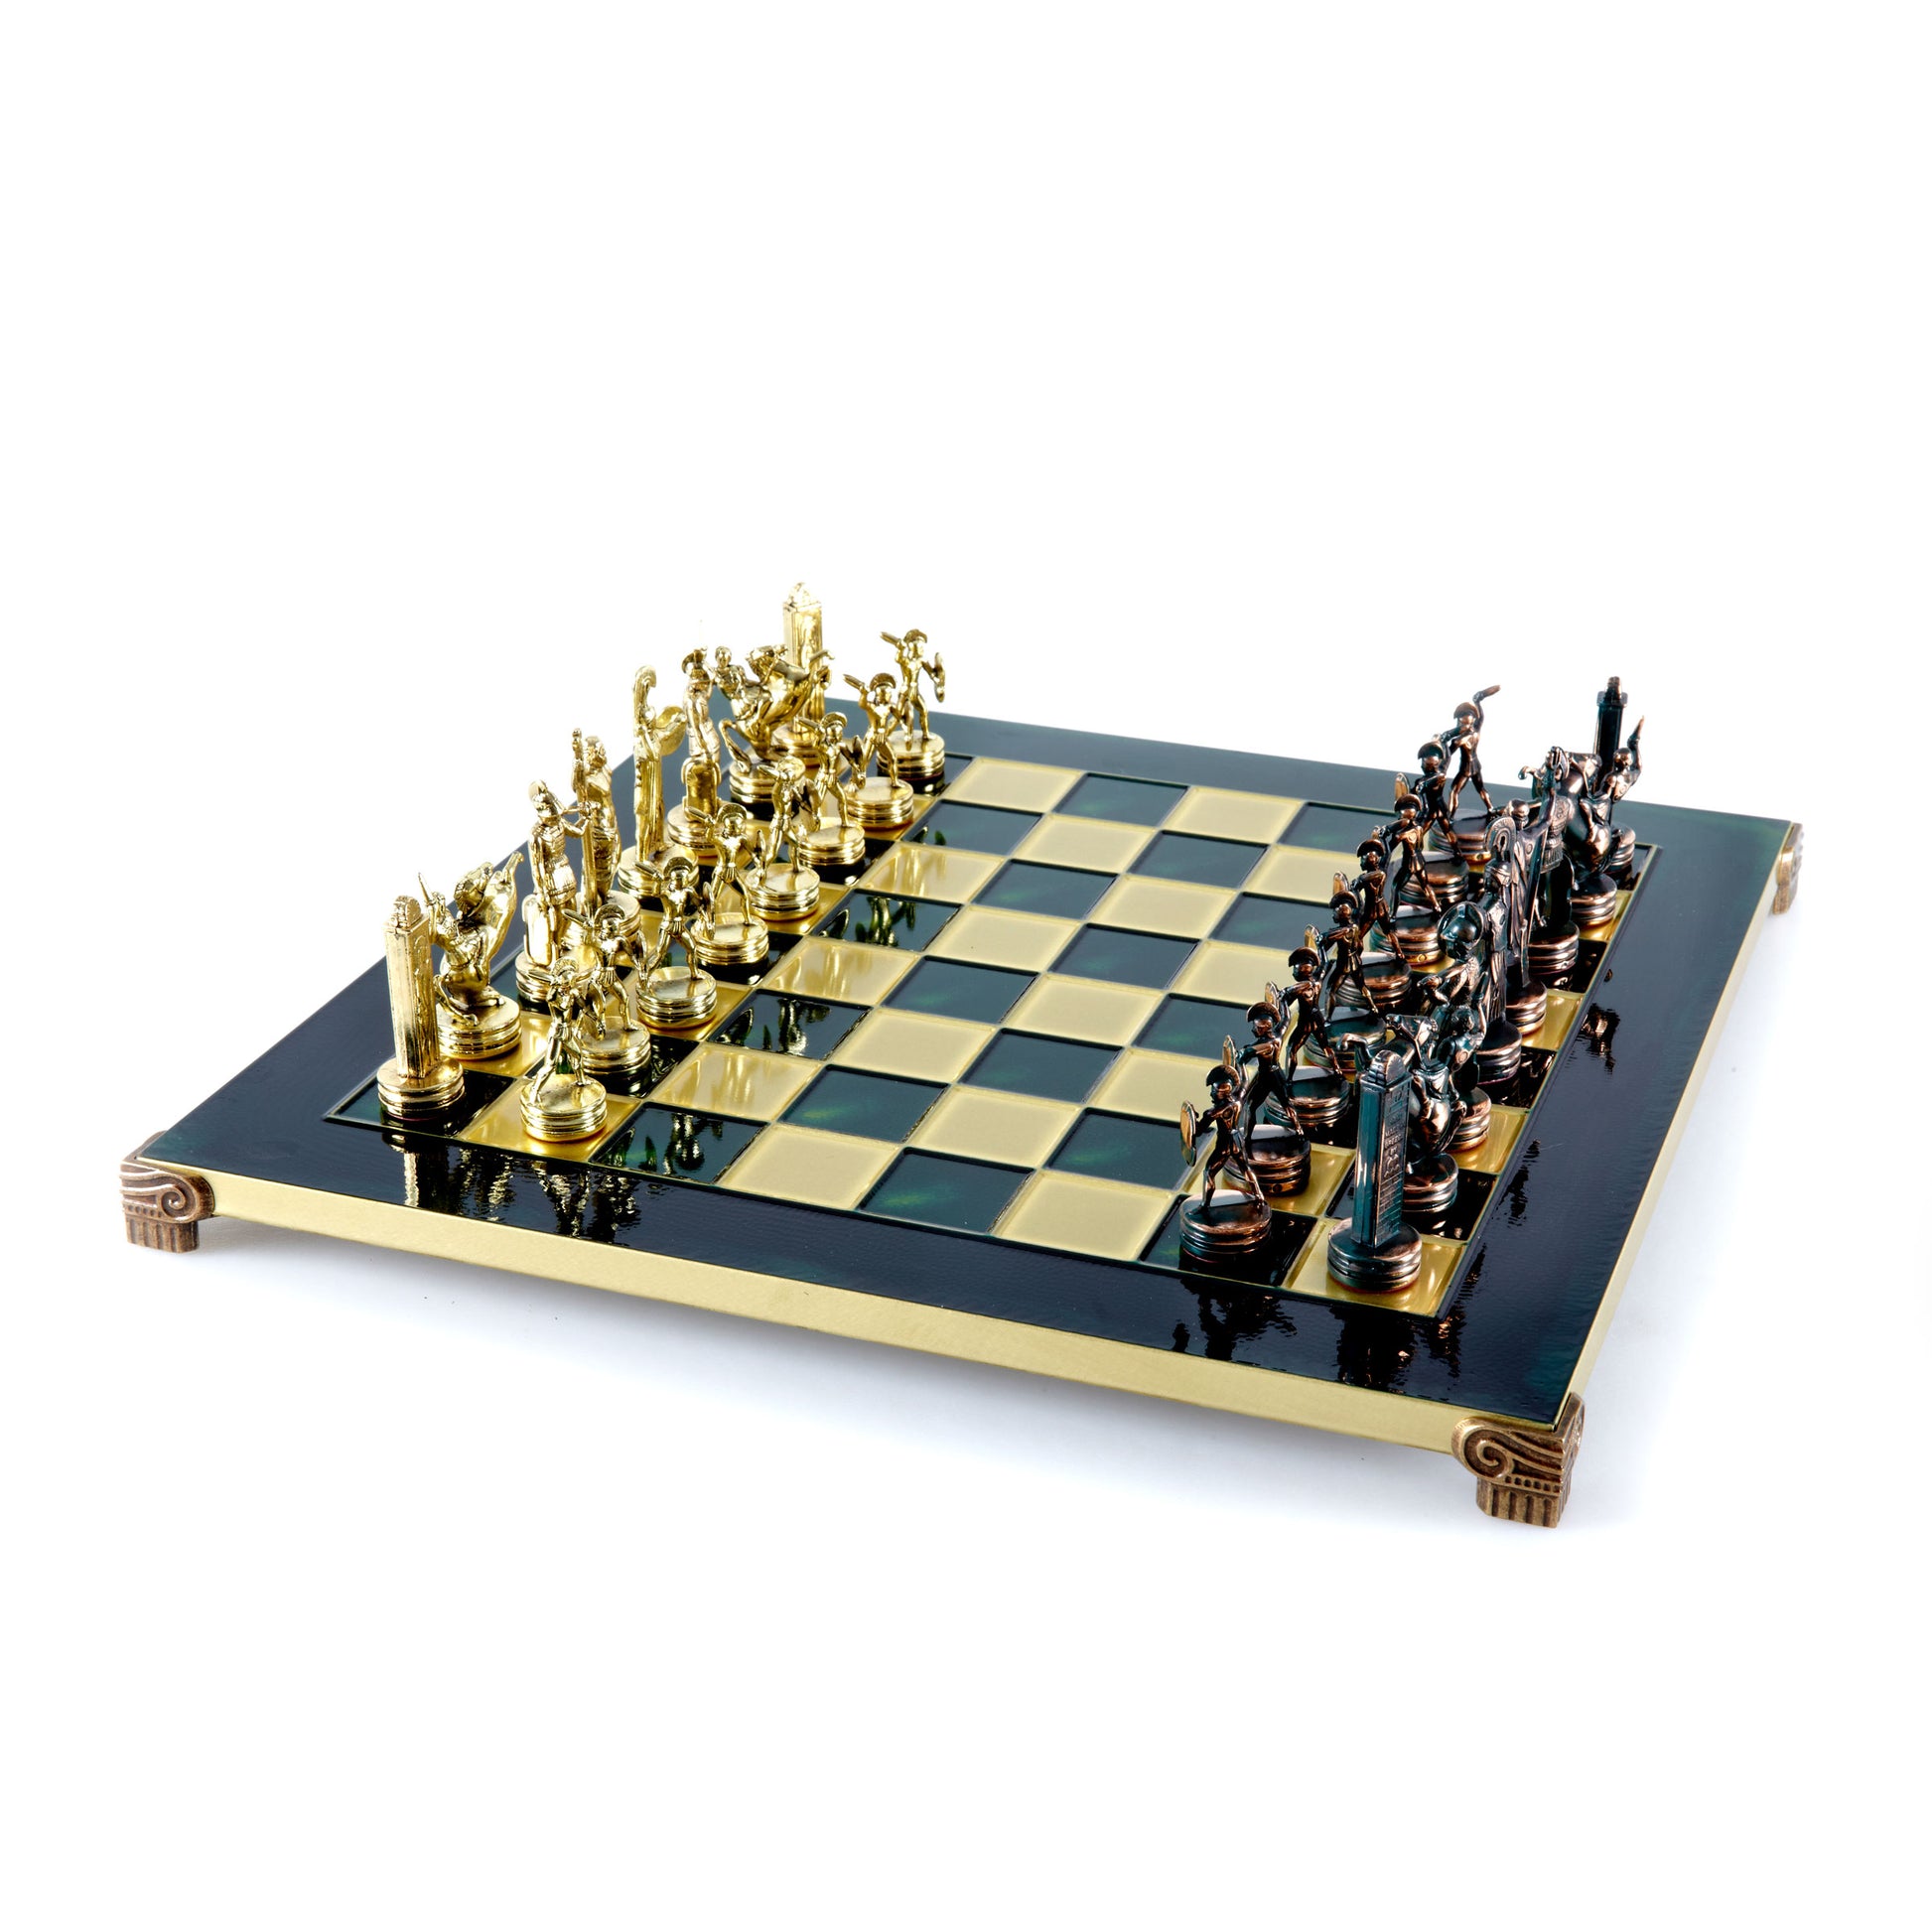 GREEK MYTHOLOGY CHESS SET with green/gold chessmen and bronze chessboard 36 x 36cm (Medium) - Premium Chess from MANOPOULOS Chess & Backgammon - Just €210! Shop now at MANOPOULOS Chess & Backgammon